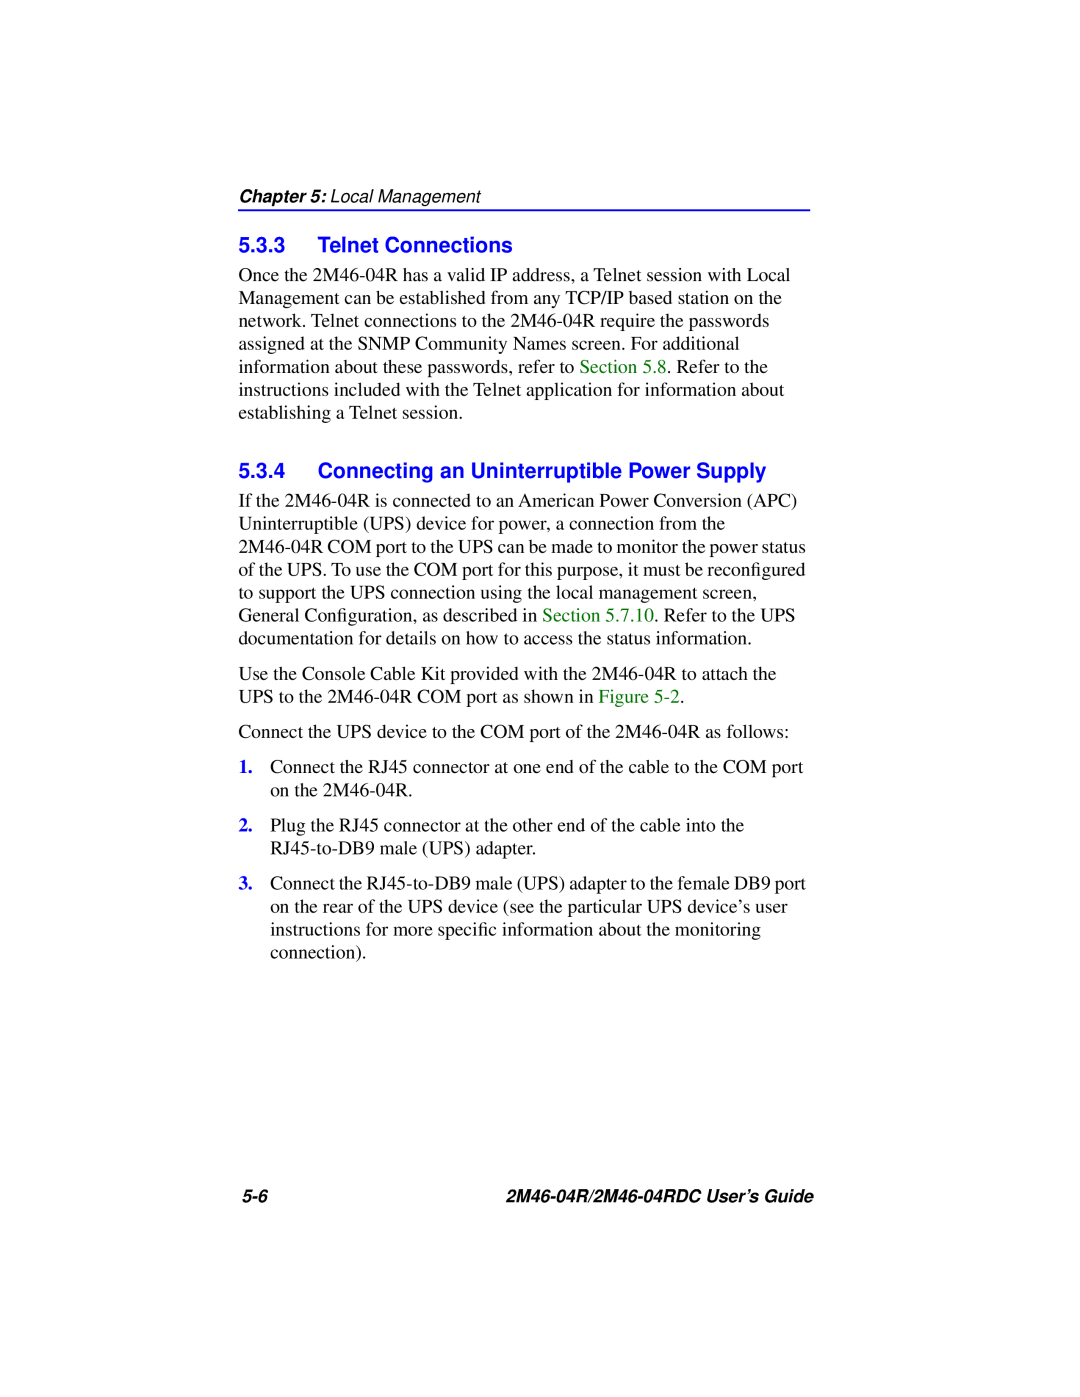 Cabletron Systems pmn manual Telnet Connections, Connecting an Uninterruptible Power Supply 